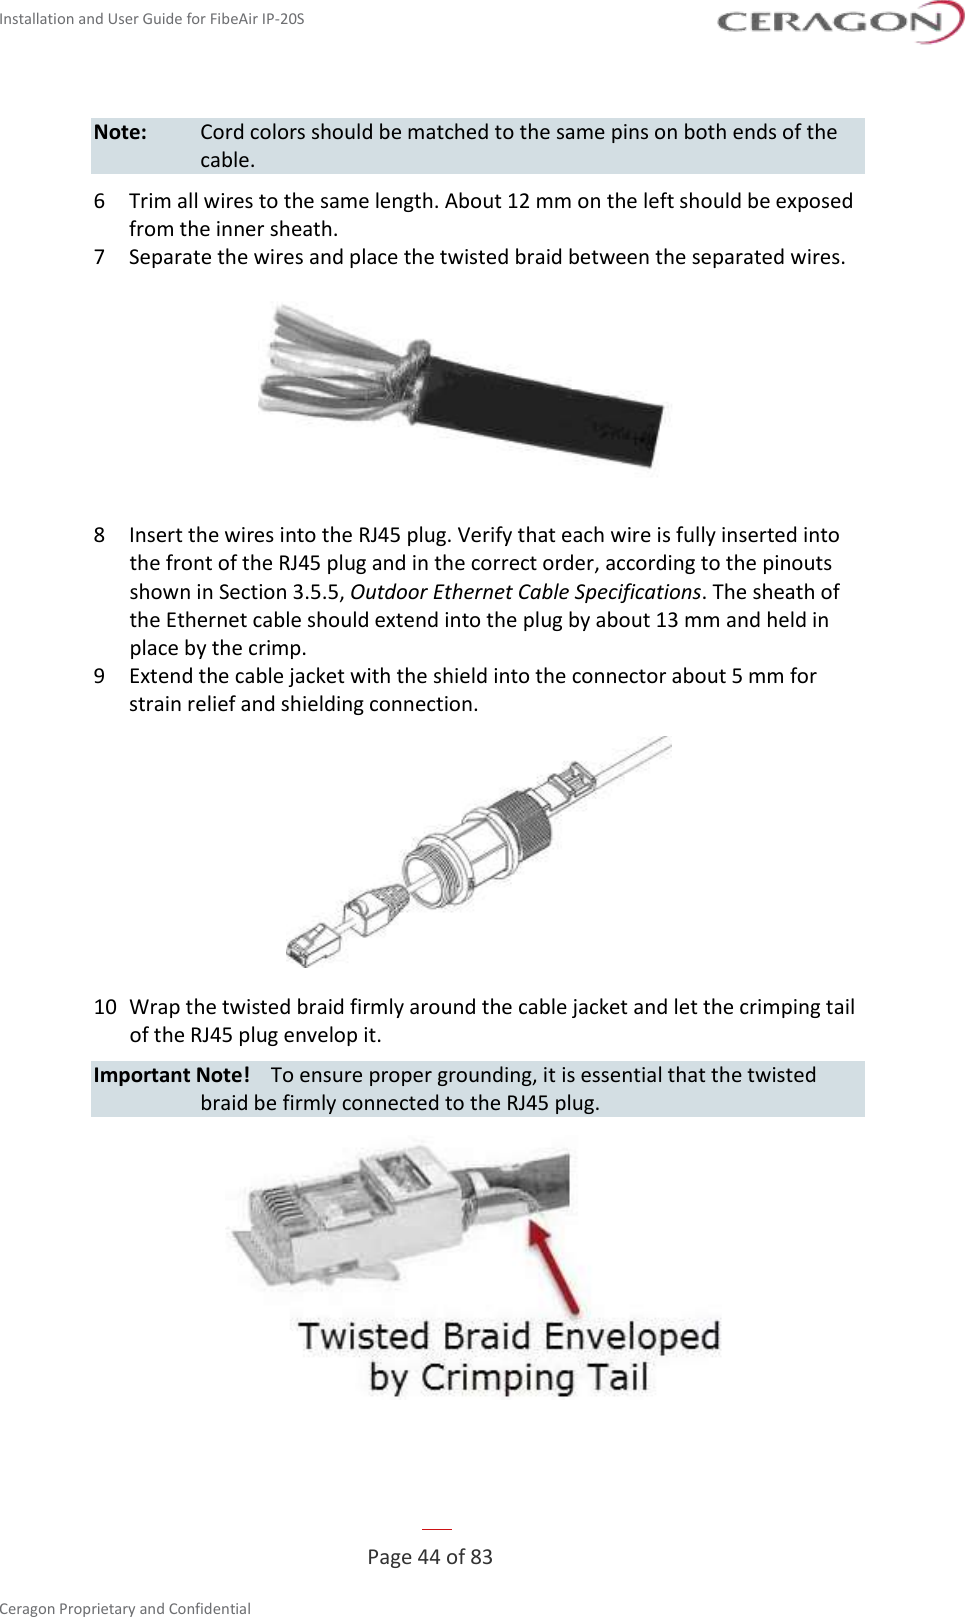 Installation and User Guide for FibeAir IP-20S   Page 44 of 83  Ceragon Proprietary and Confidential     Note:  Cord colors should be matched to the same pins on both ends of the cable. 6  Trim all wires to the same length. About 12 mm on the left should be exposed from the inner sheath. 7  Separate the wires and place the twisted braid between the separated wires.  8  Insert the wires into the RJ45 plug. Verify that each wire is fully inserted into the front of the RJ45 plug and in the correct order, according to the pinouts shown in Section 3.5.5, Outdoor Ethernet Cable Specifications. The sheath of the Ethernet cable should extend into the plug by about 13 mm and held in place by the crimp.  9  Extend the cable jacket with the shield into the connector about 5 mm for strain relief and shielding connection.  10  Wrap the twisted braid firmly around the cable jacket and let the crimping tail of the RJ45 plug envelop it. Important Note!  To ensure proper grounding, it is essential that the twisted braid be firmly connected to the RJ45 plug.   